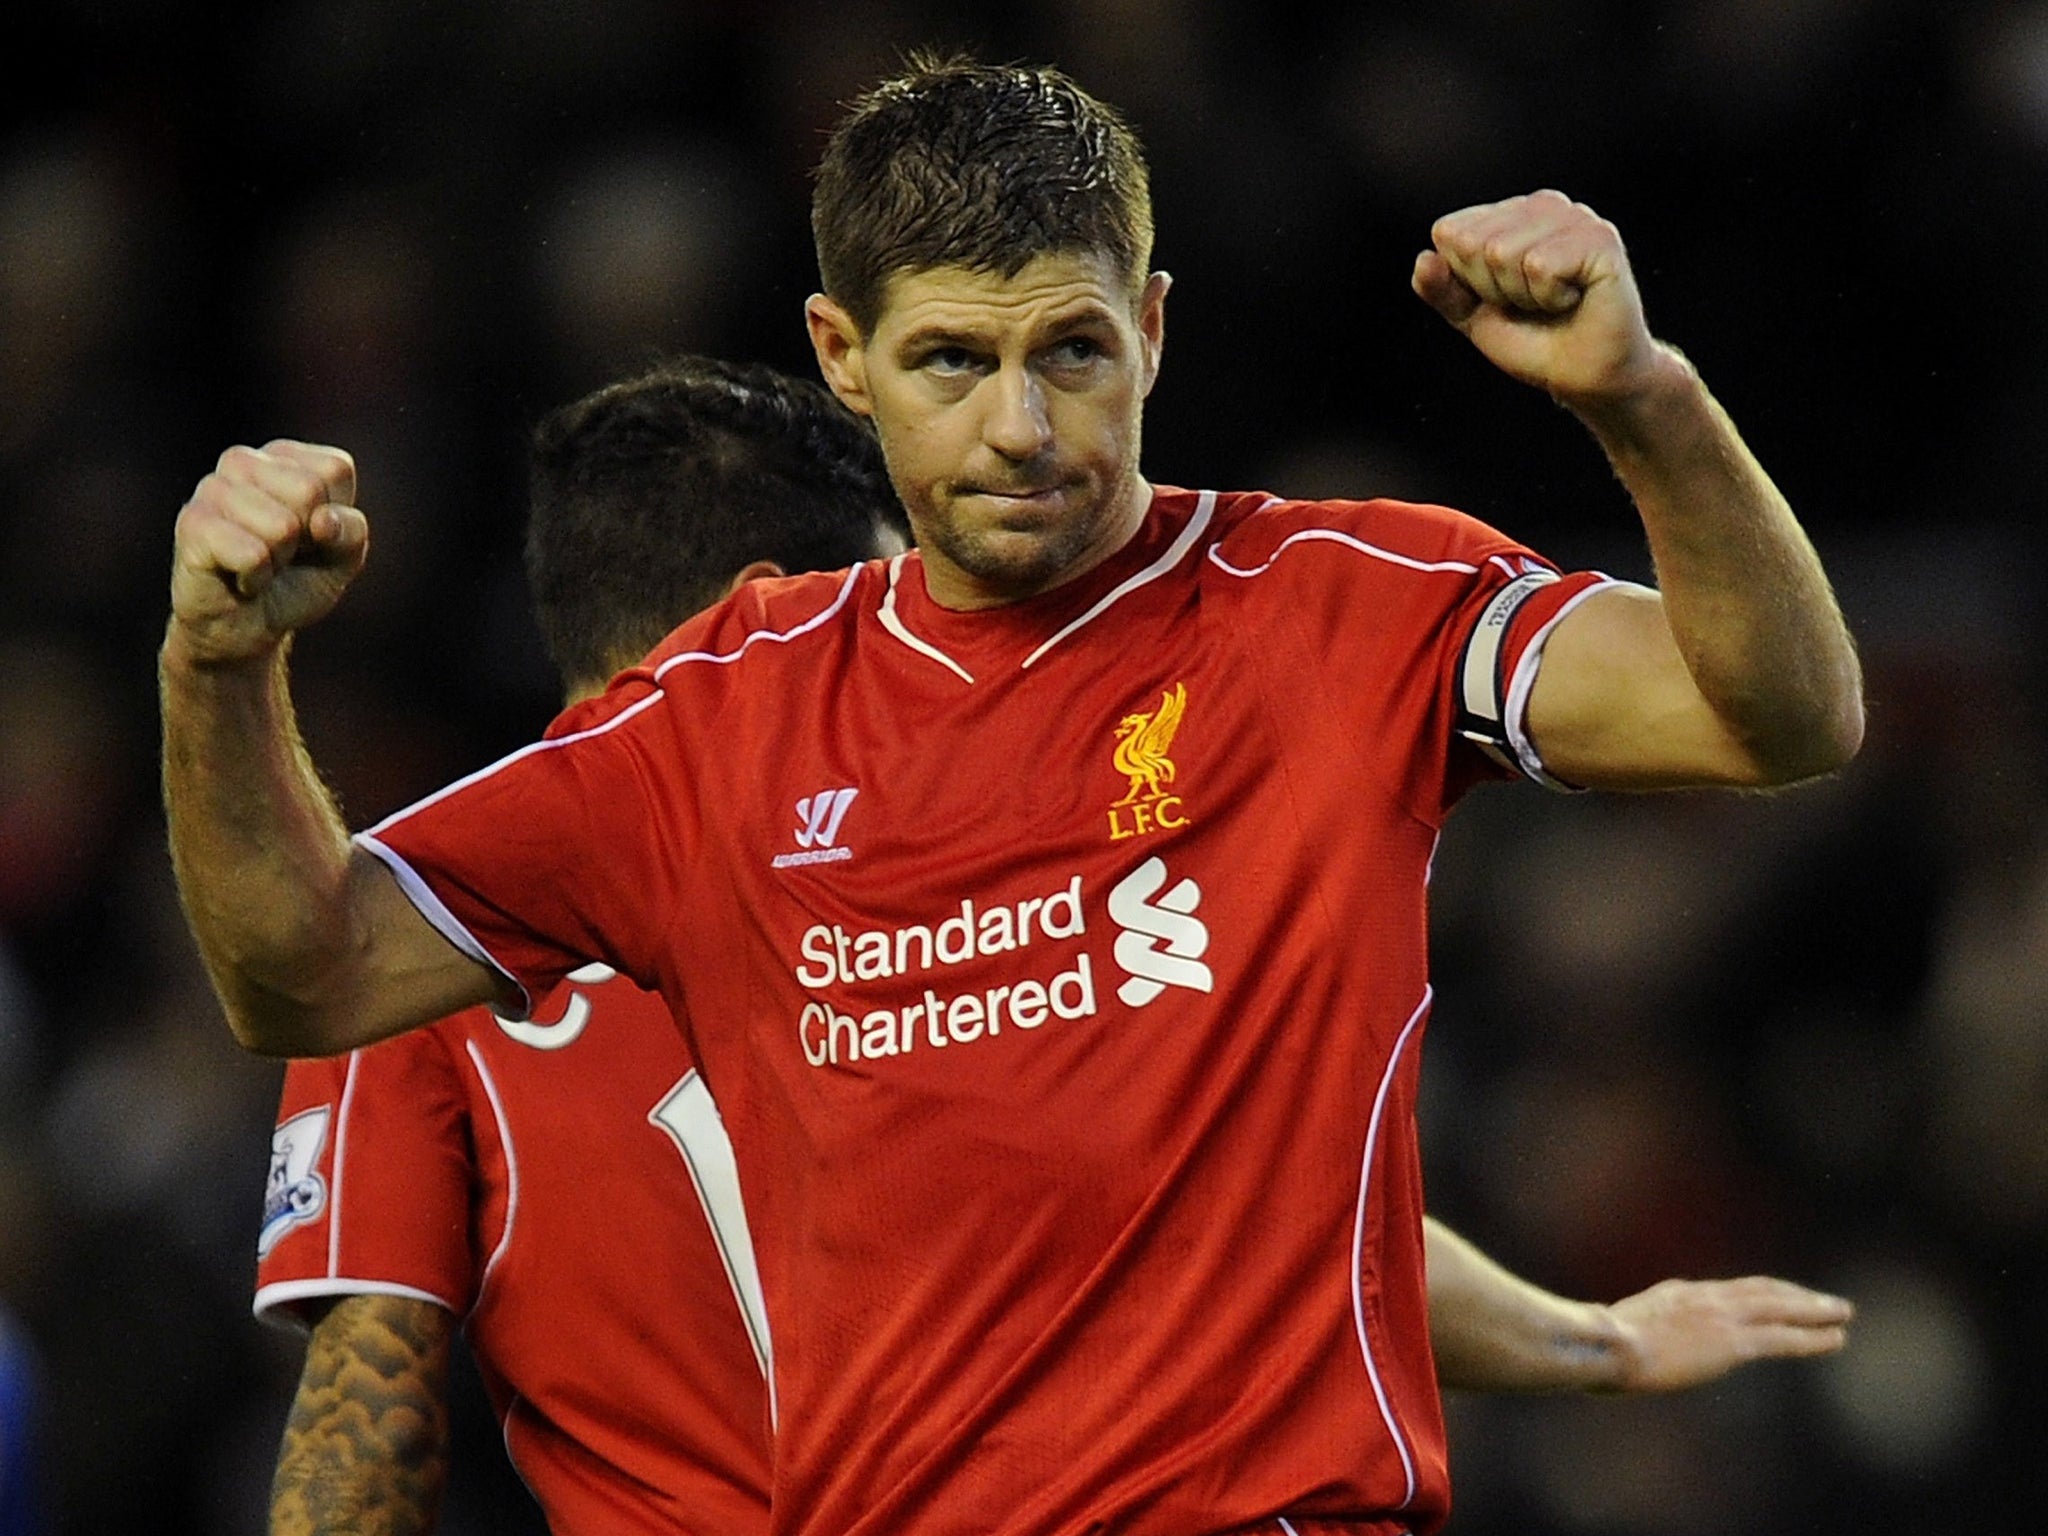 Liverpool have announced a friendly for departing captain Steven Gerrard